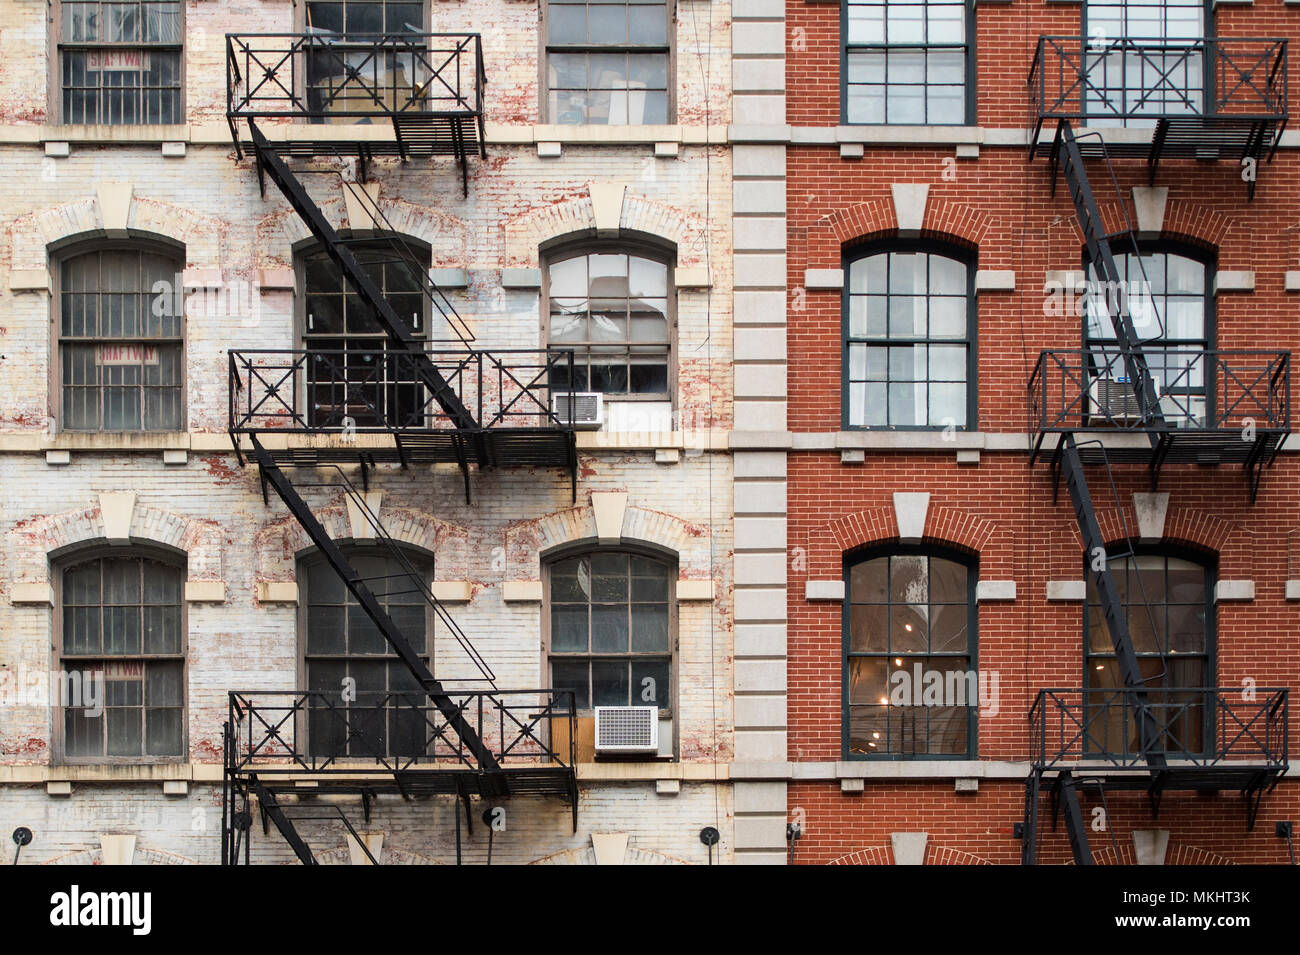 Close-up view of New York City style apartment buildings with emergency stairs along Mott Street in the Chinatown neighborhood of Manhattan NYC. Stock Photo